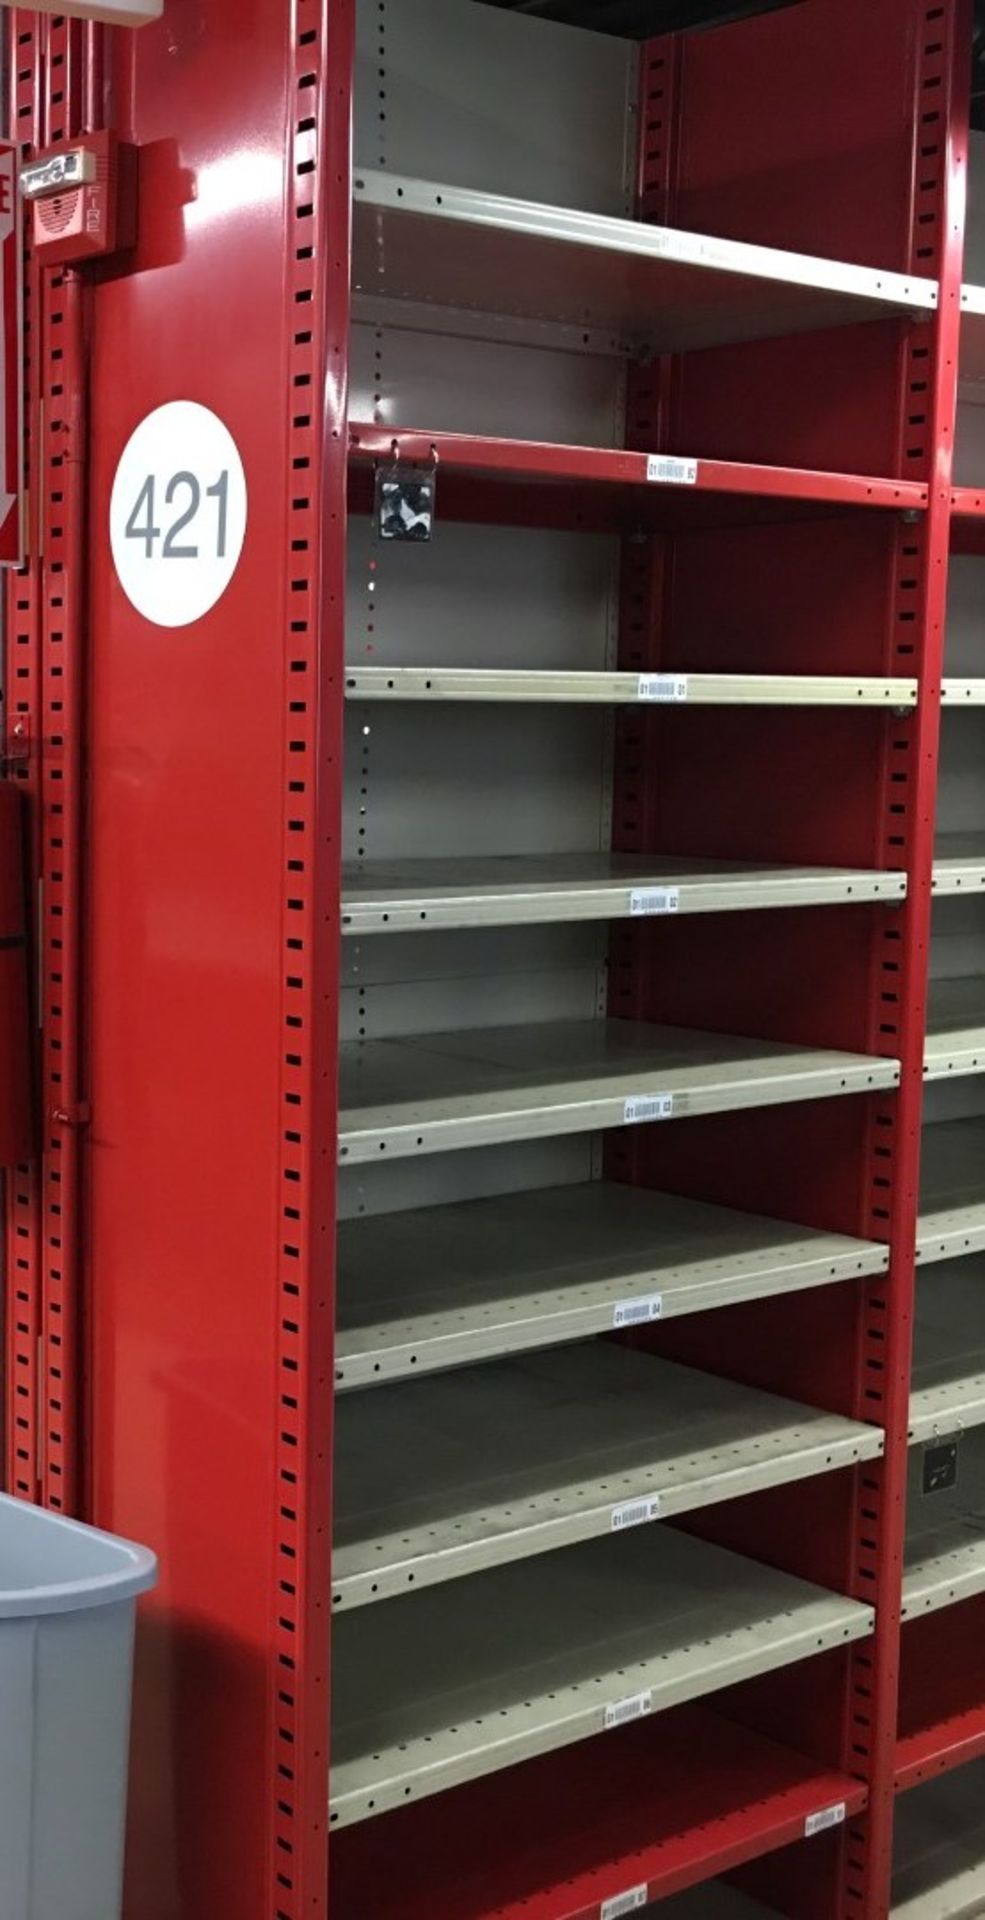 52 SECTIONS OF HALLOWELL H-POST CLOSED BACK SHELVING, SIZE :98.5"H X 18"D X 36"W WITH 5 SHELVES EACH - Image 3 of 3